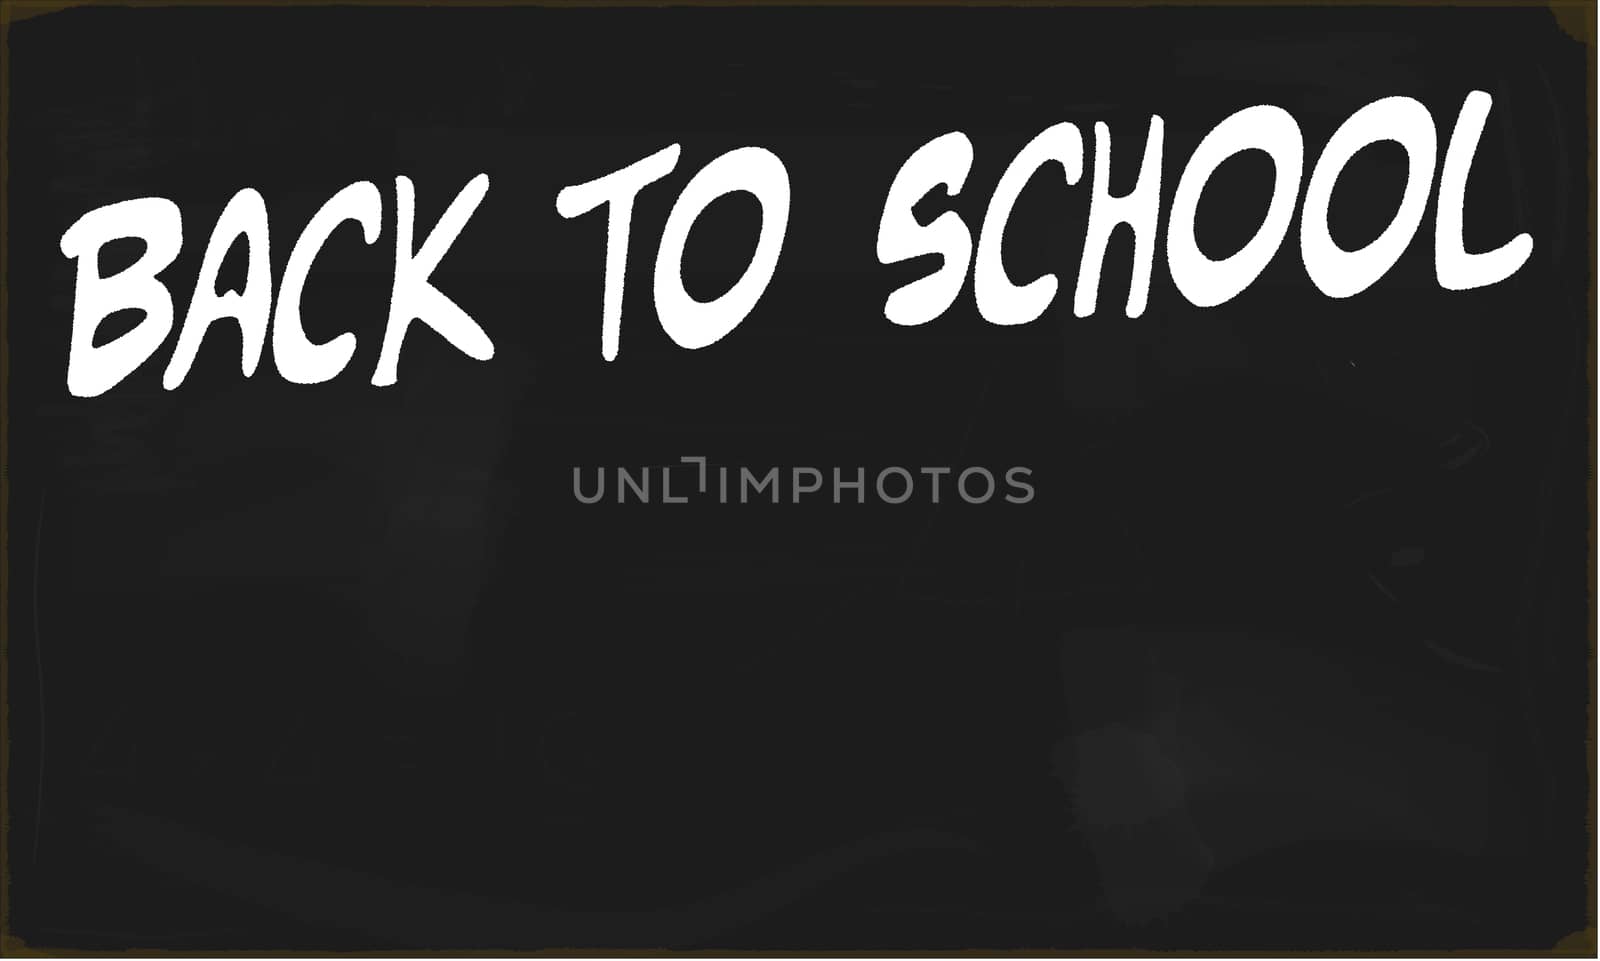 A worn out old blackboard with the legend 'back to school' in original vector text.